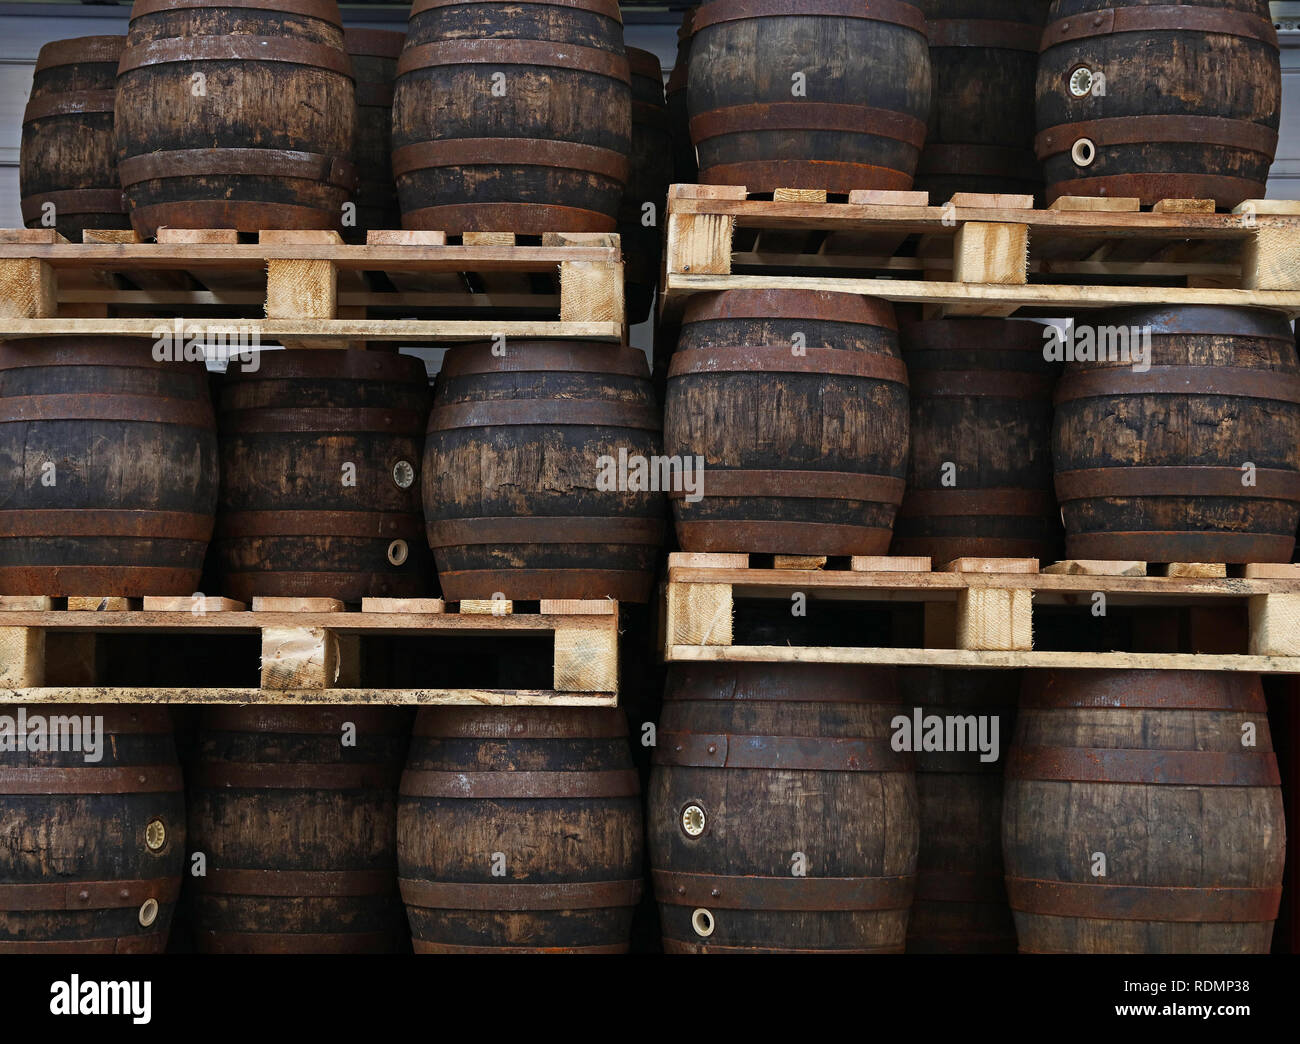 Rows of pallets with staked old grunge vintage dark oak wood barrels of craft beer at warehouse of brewery Stock Photo